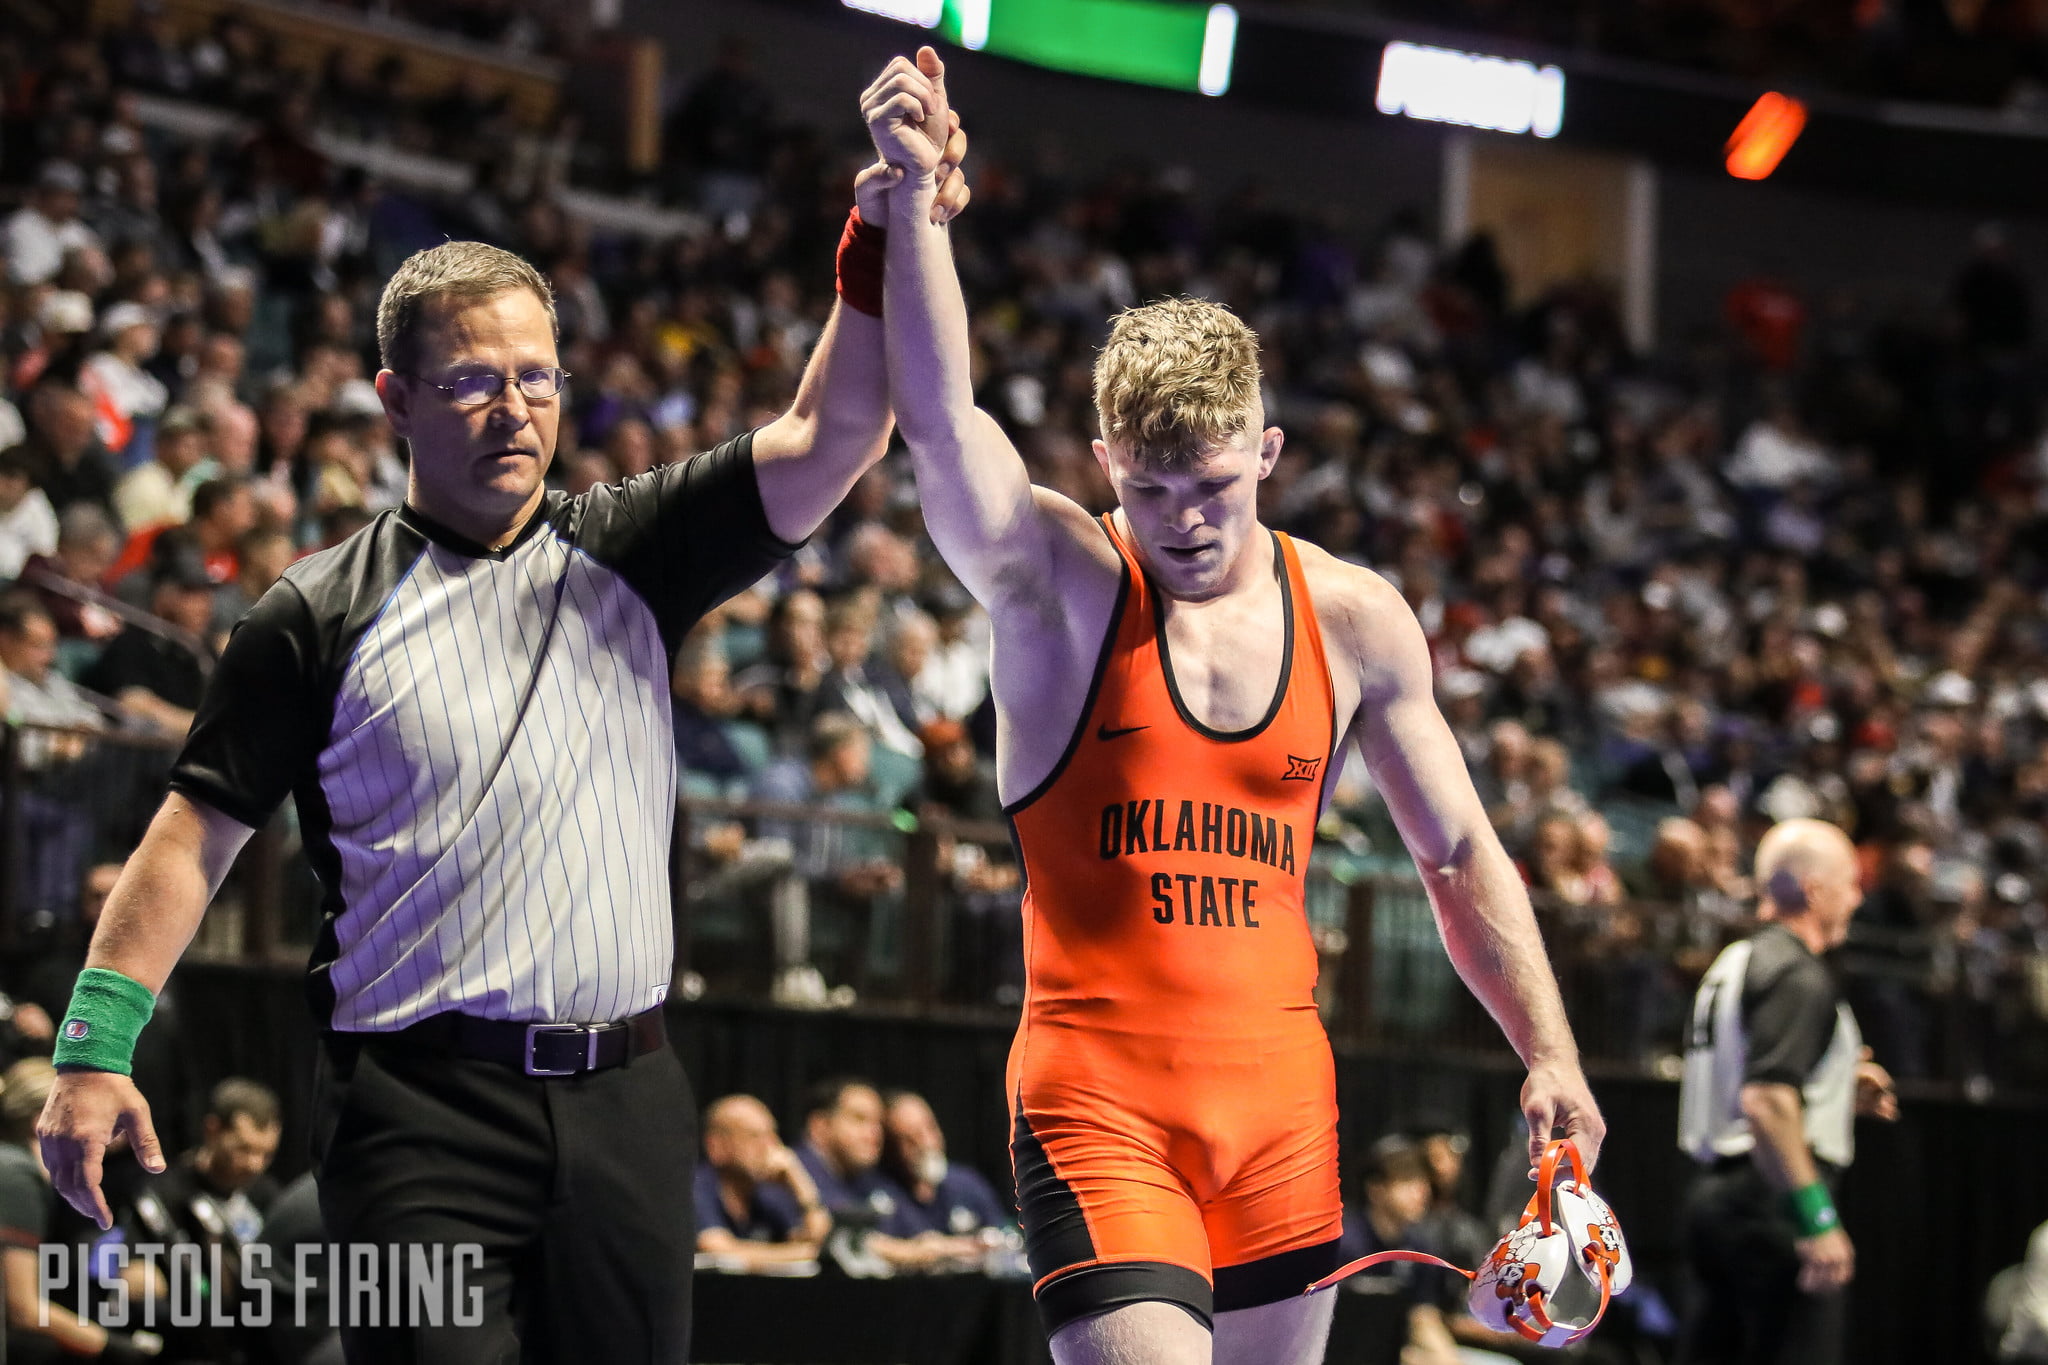 Five Observations from the First Day of the NCAA Wrestling Tournament